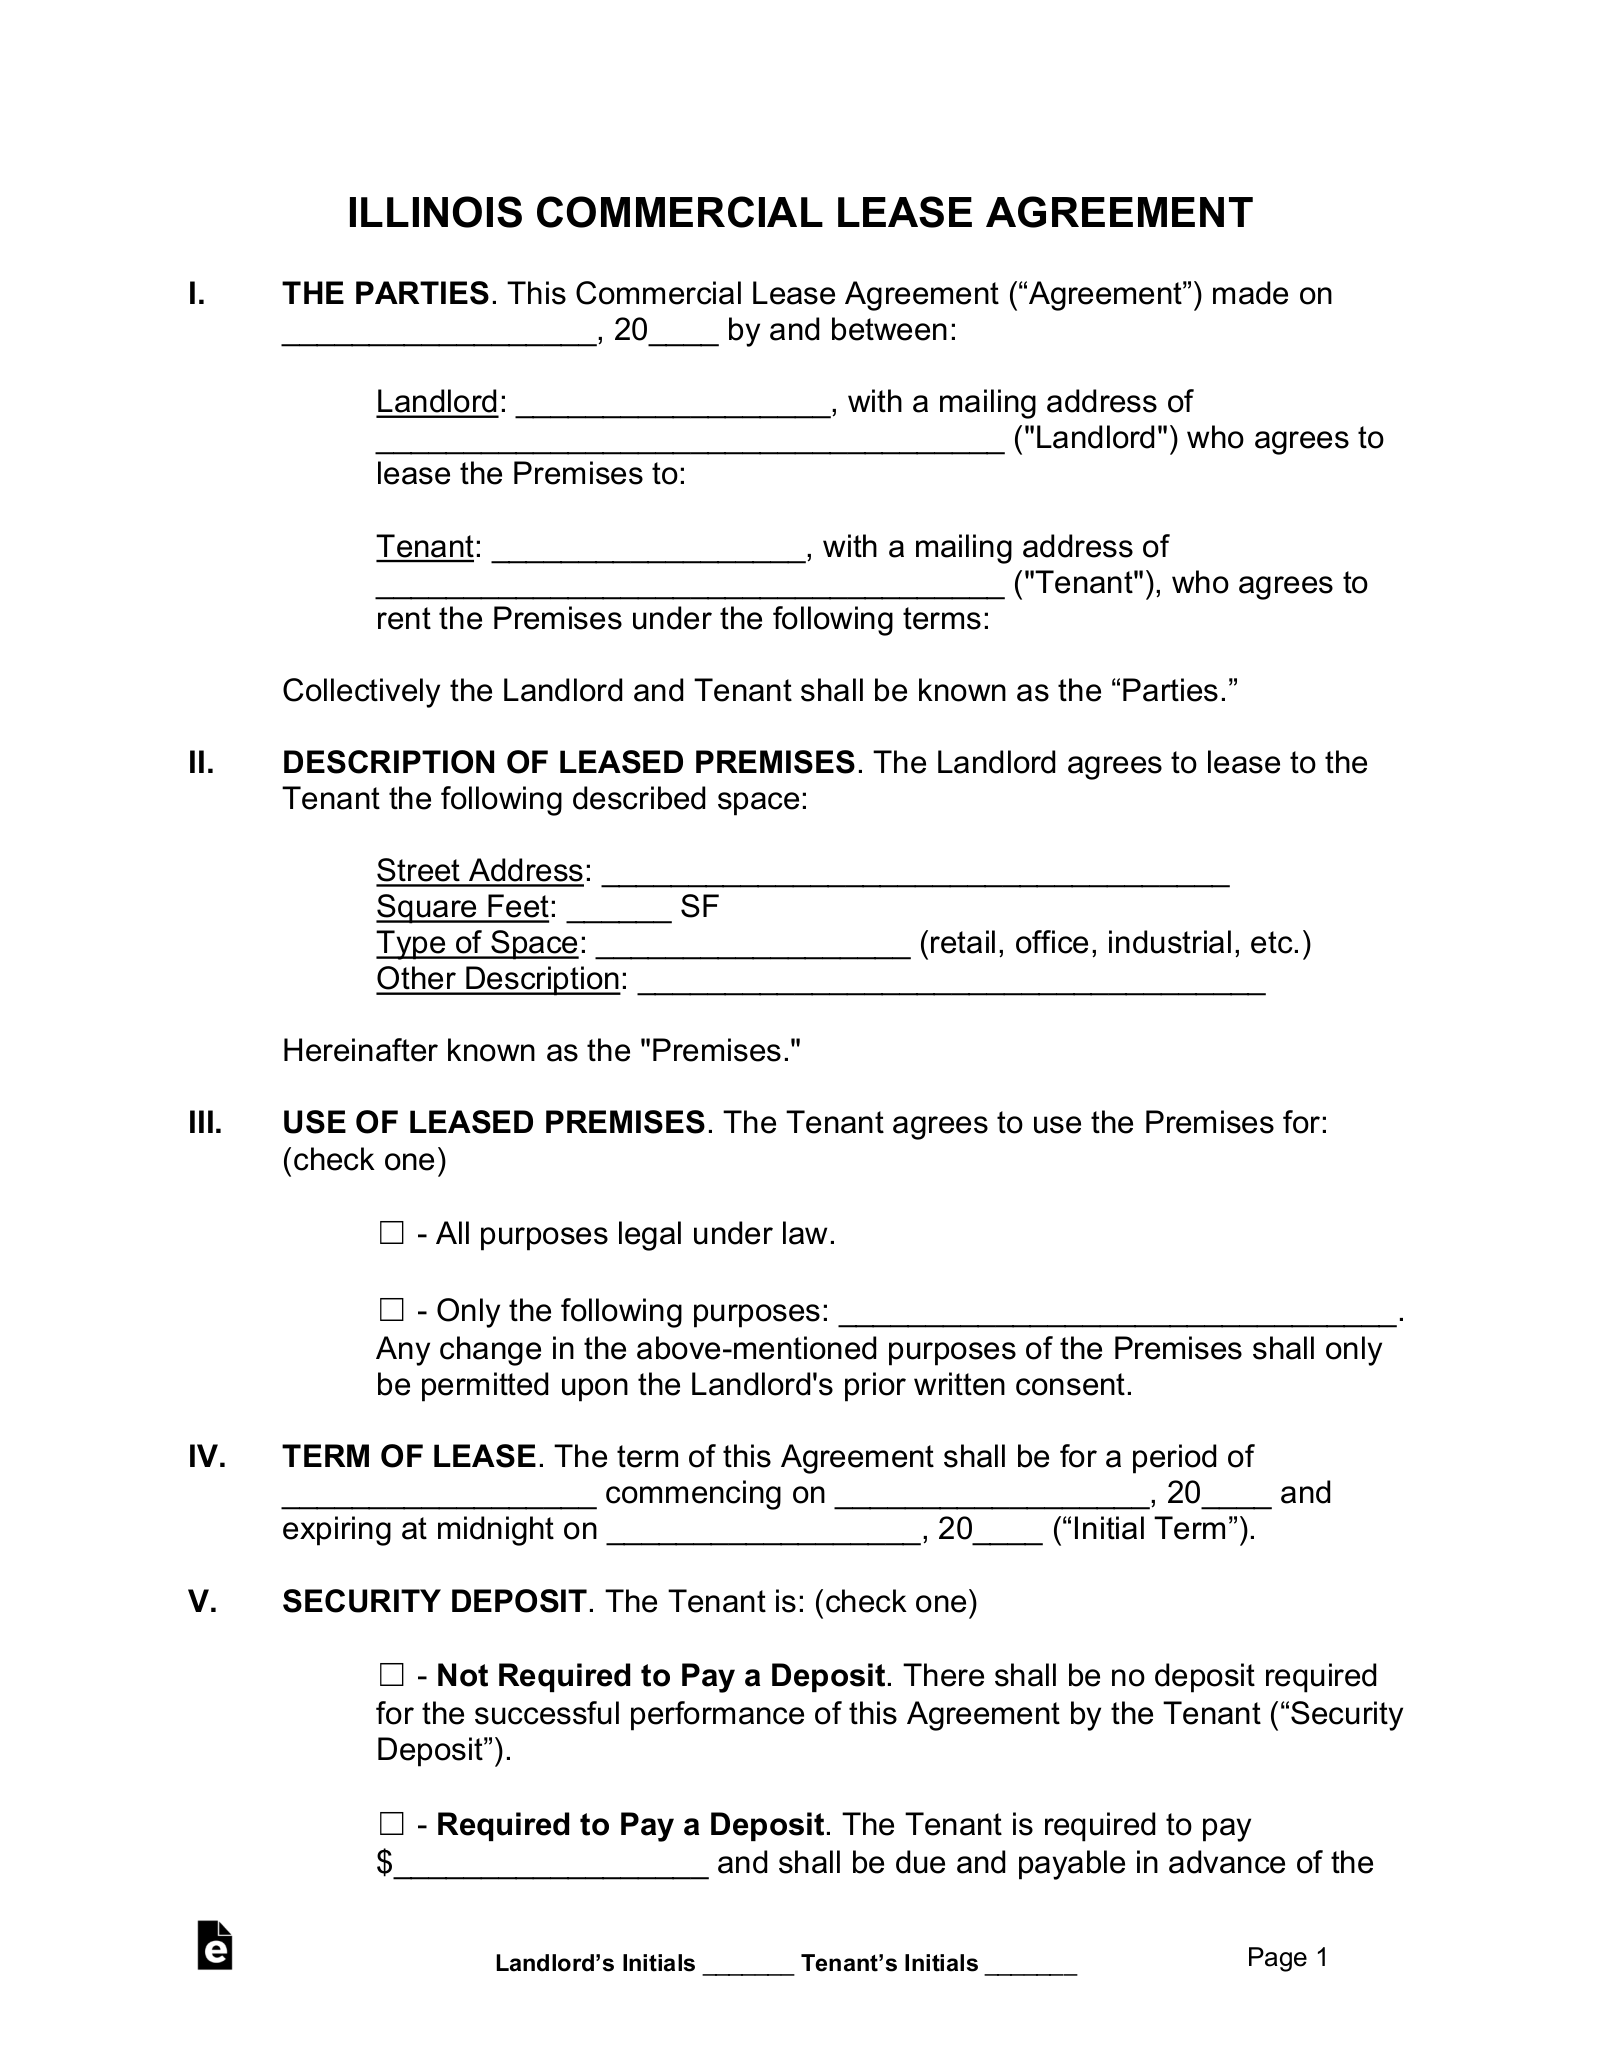 Illinois Commercial Lease Agreement Template